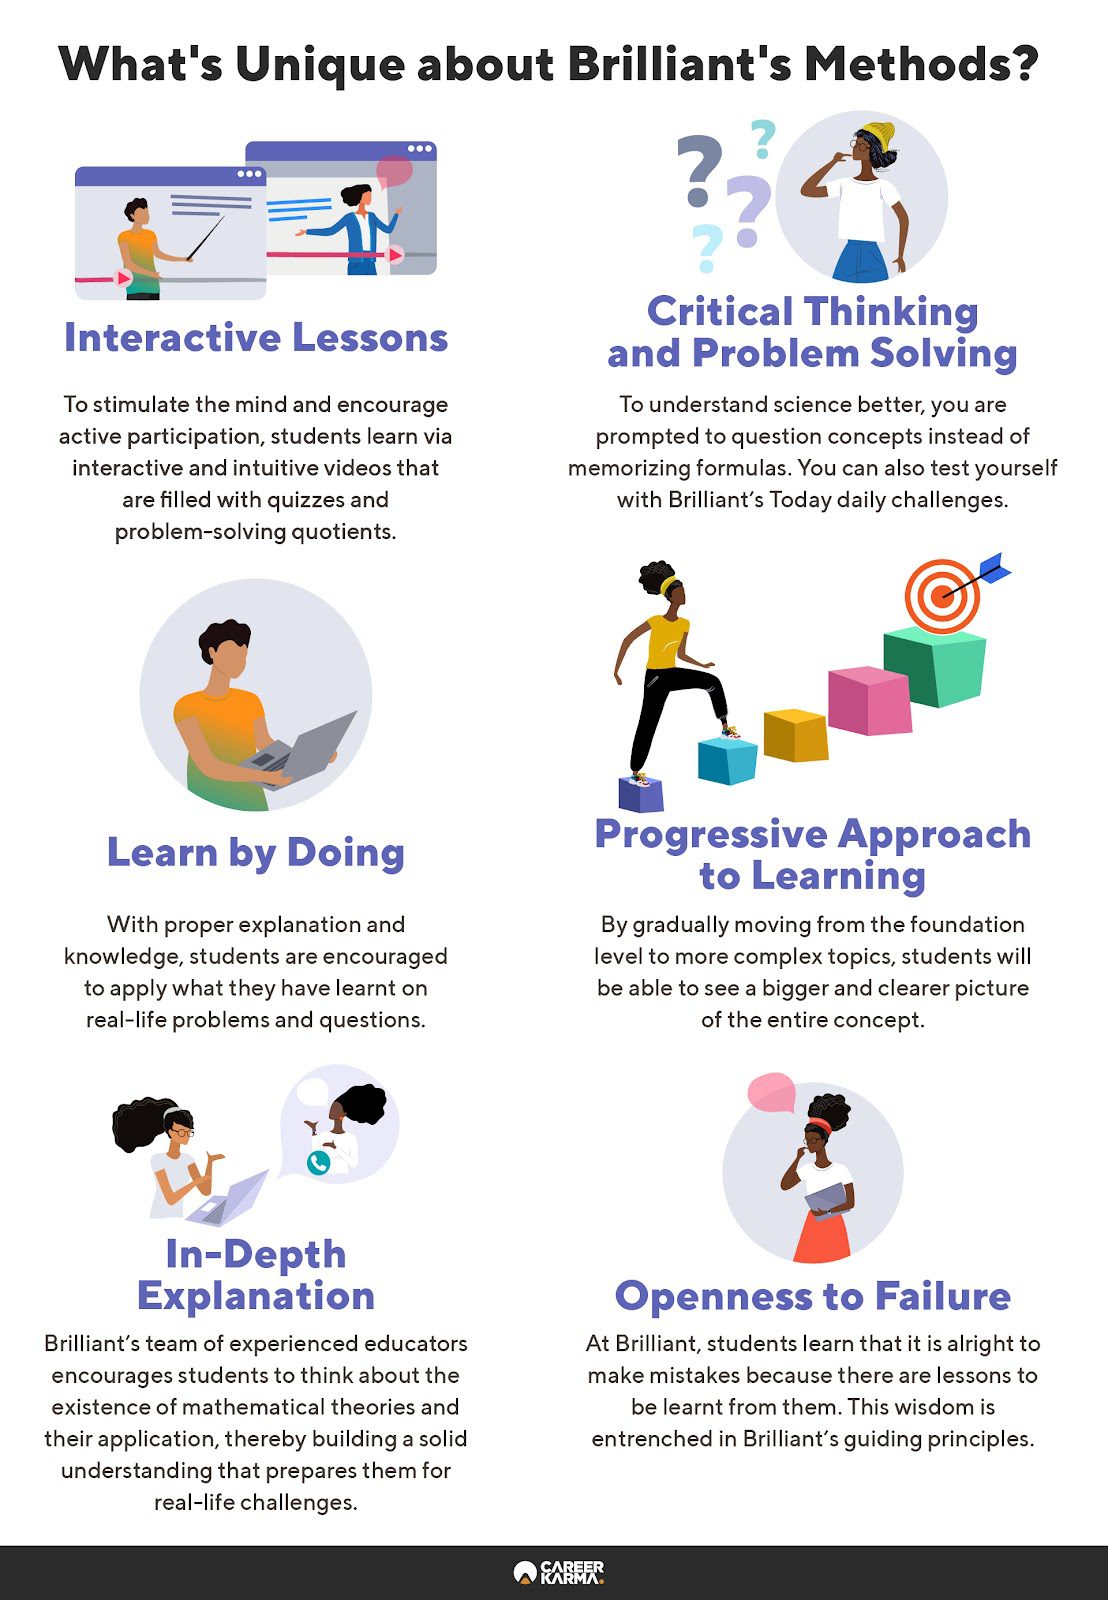 An infographic covering Brilliant’s unique approach to learning